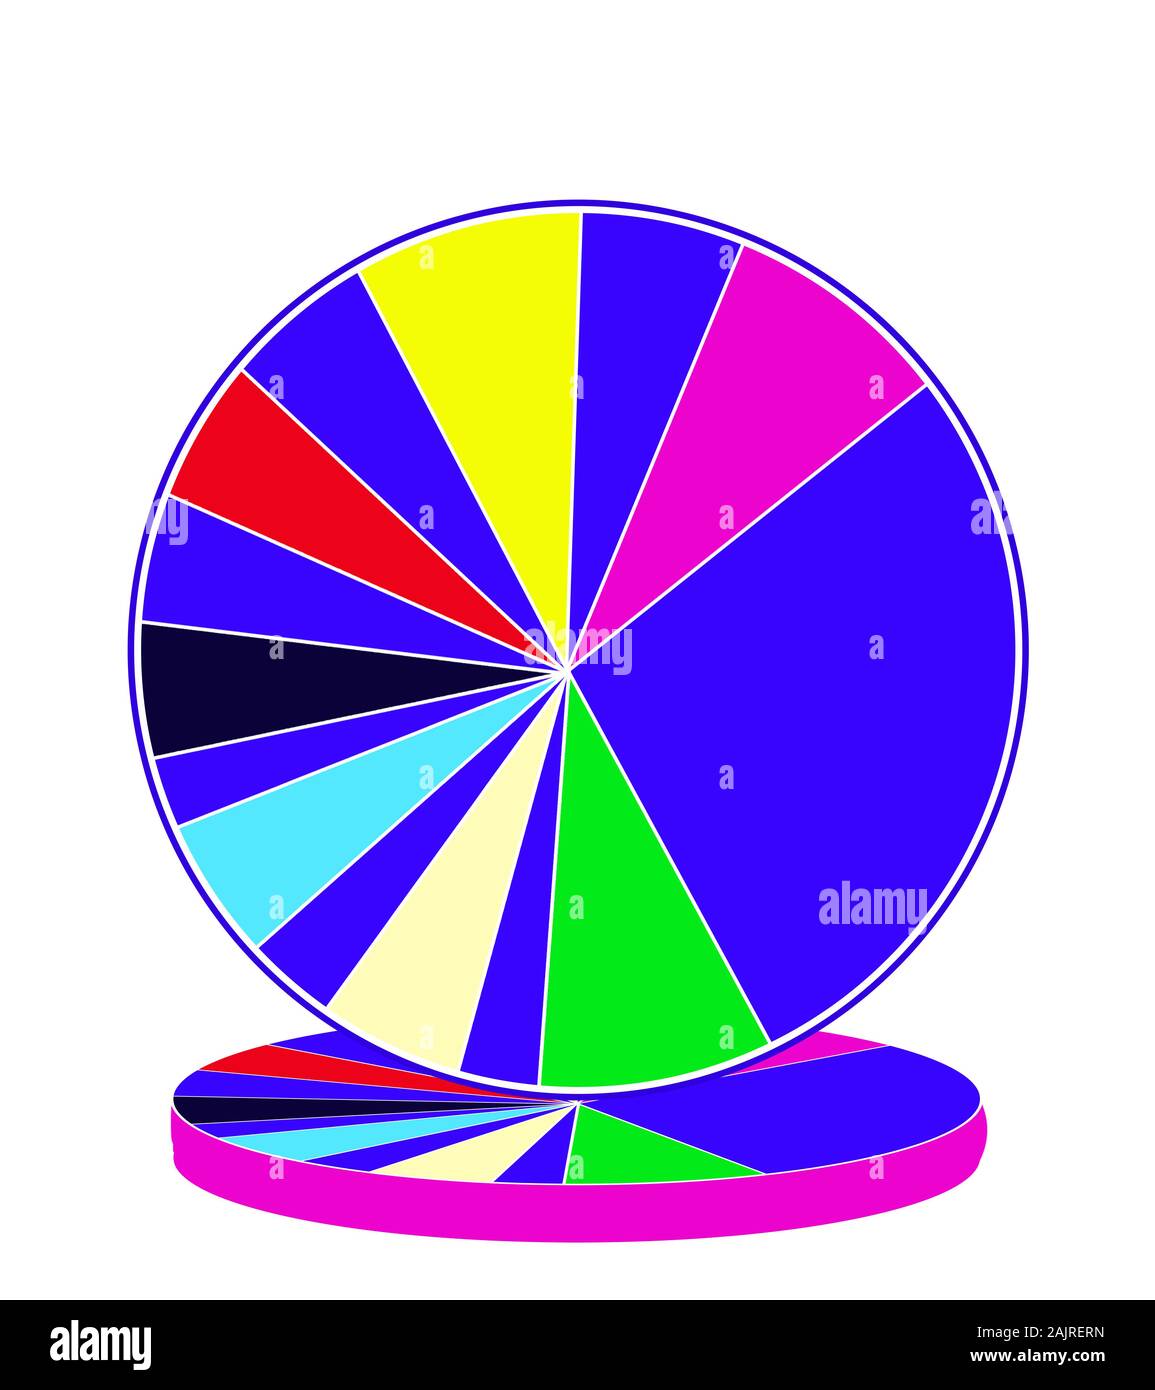 Graphic Illustration in Bright Bold Colors of a Pie Graph ideal for Home Budgets Stock Photo